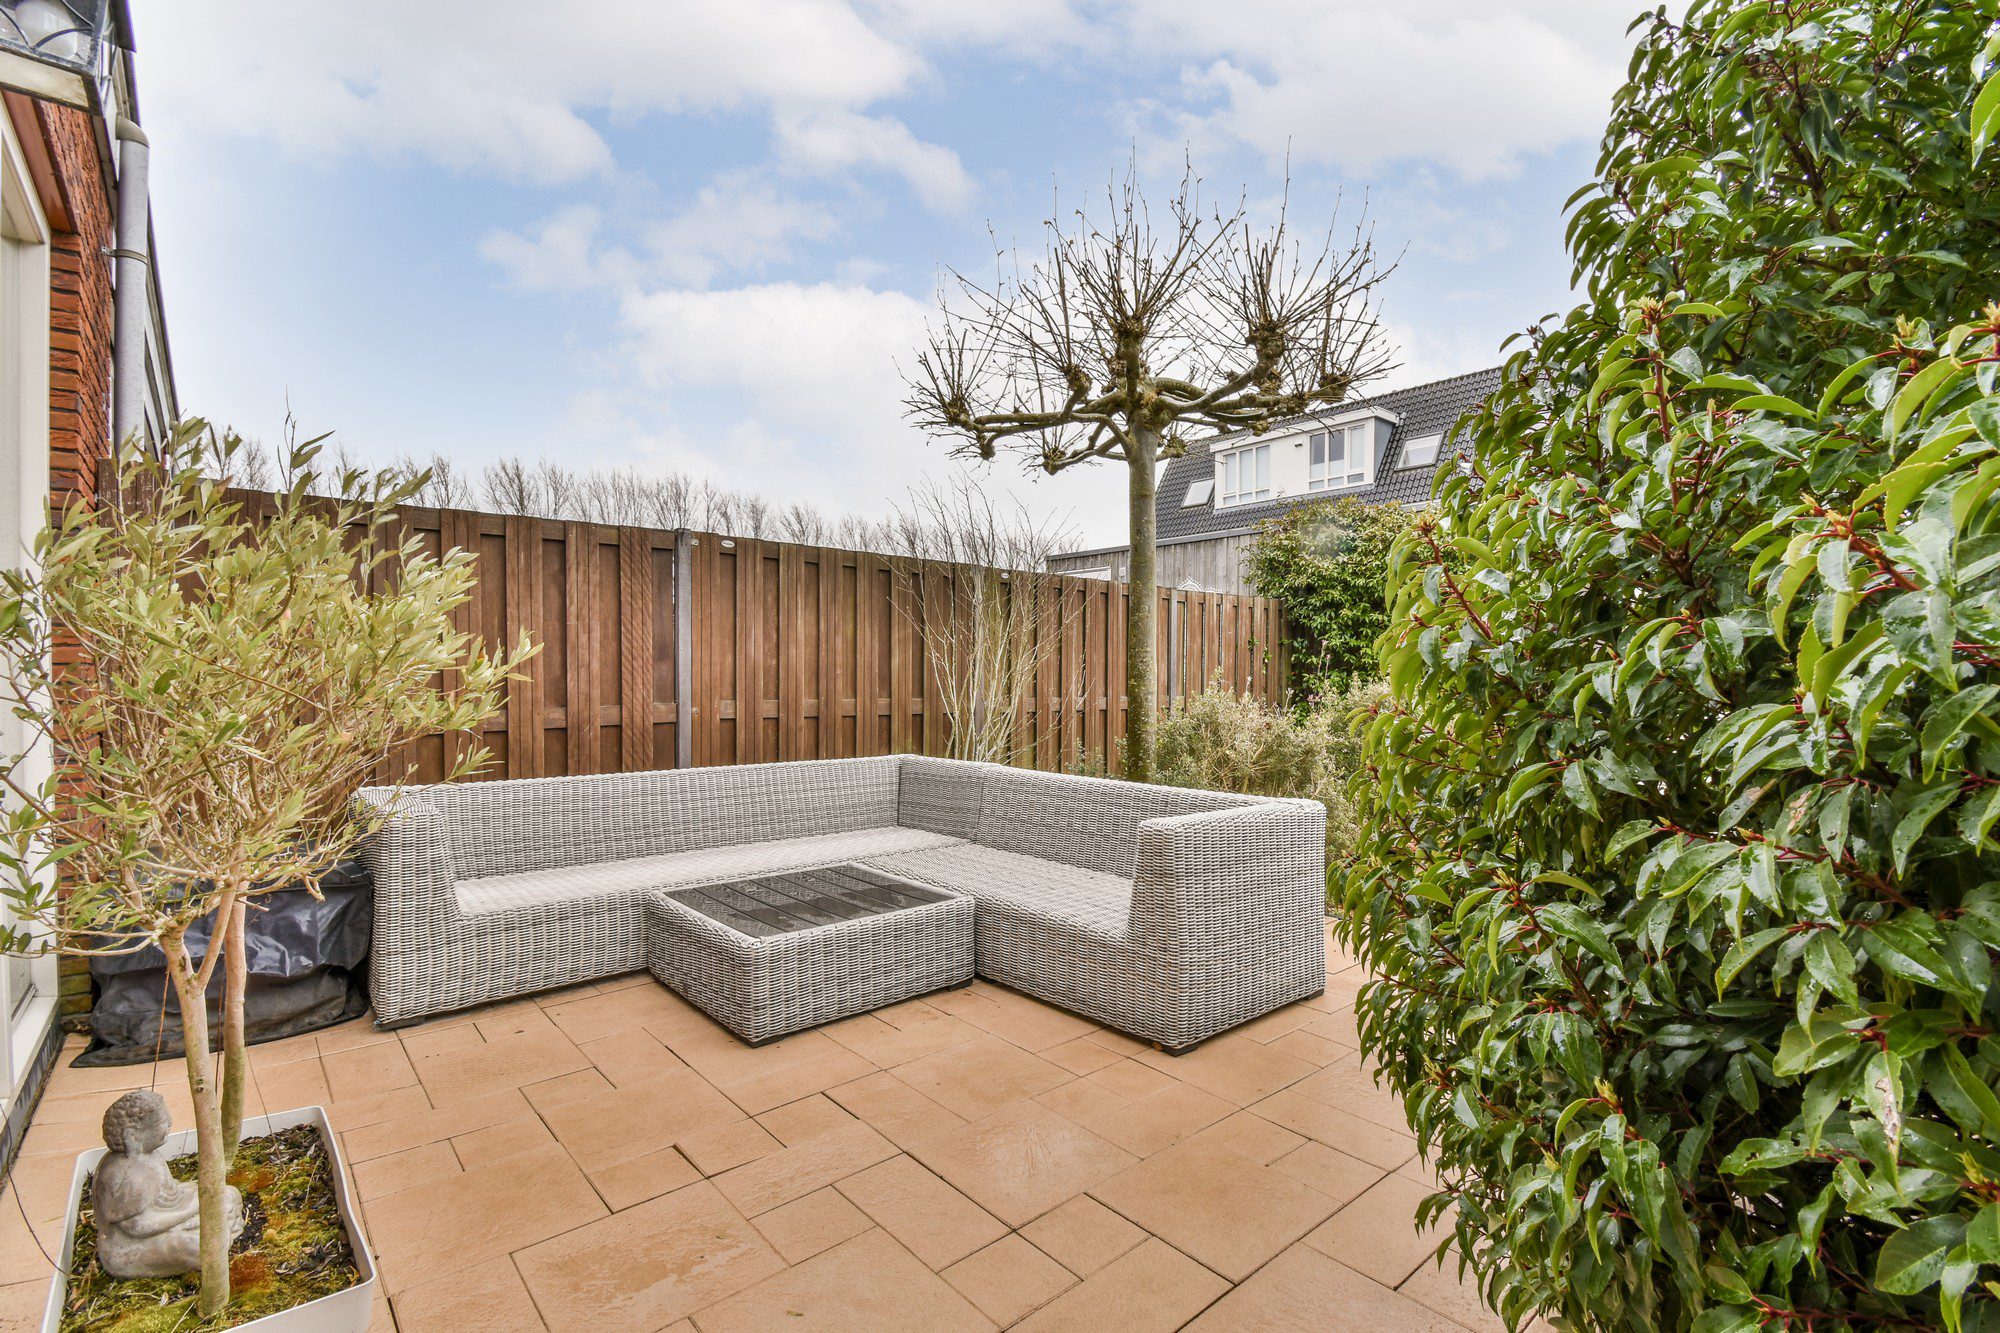 This image depicts a neatly organized backyard patio. There's a contemporary outdoor furniture set that includes a wicker sectional sofa with a matching table, suggesting a comfortable space for relaxation or entertaining guests. The patio flooring consists of large, square terracotta tiles, and the area is bordered by a tall wooden fence that provides privacy.To one side, the space is framed by a well-maintained green shrub with glossy leaves, possibly a laurel or similar evergreen. On the other side, there's a young, leafless tree and a potted olive tree standing in front of a small statue, which adds a decorative element to the setting. Behind the greenery, the backdrop of residential houses with pitched roofs indicates a suburban setting. The sky is partially cloudy, suggesting it might be a mild or cool day.